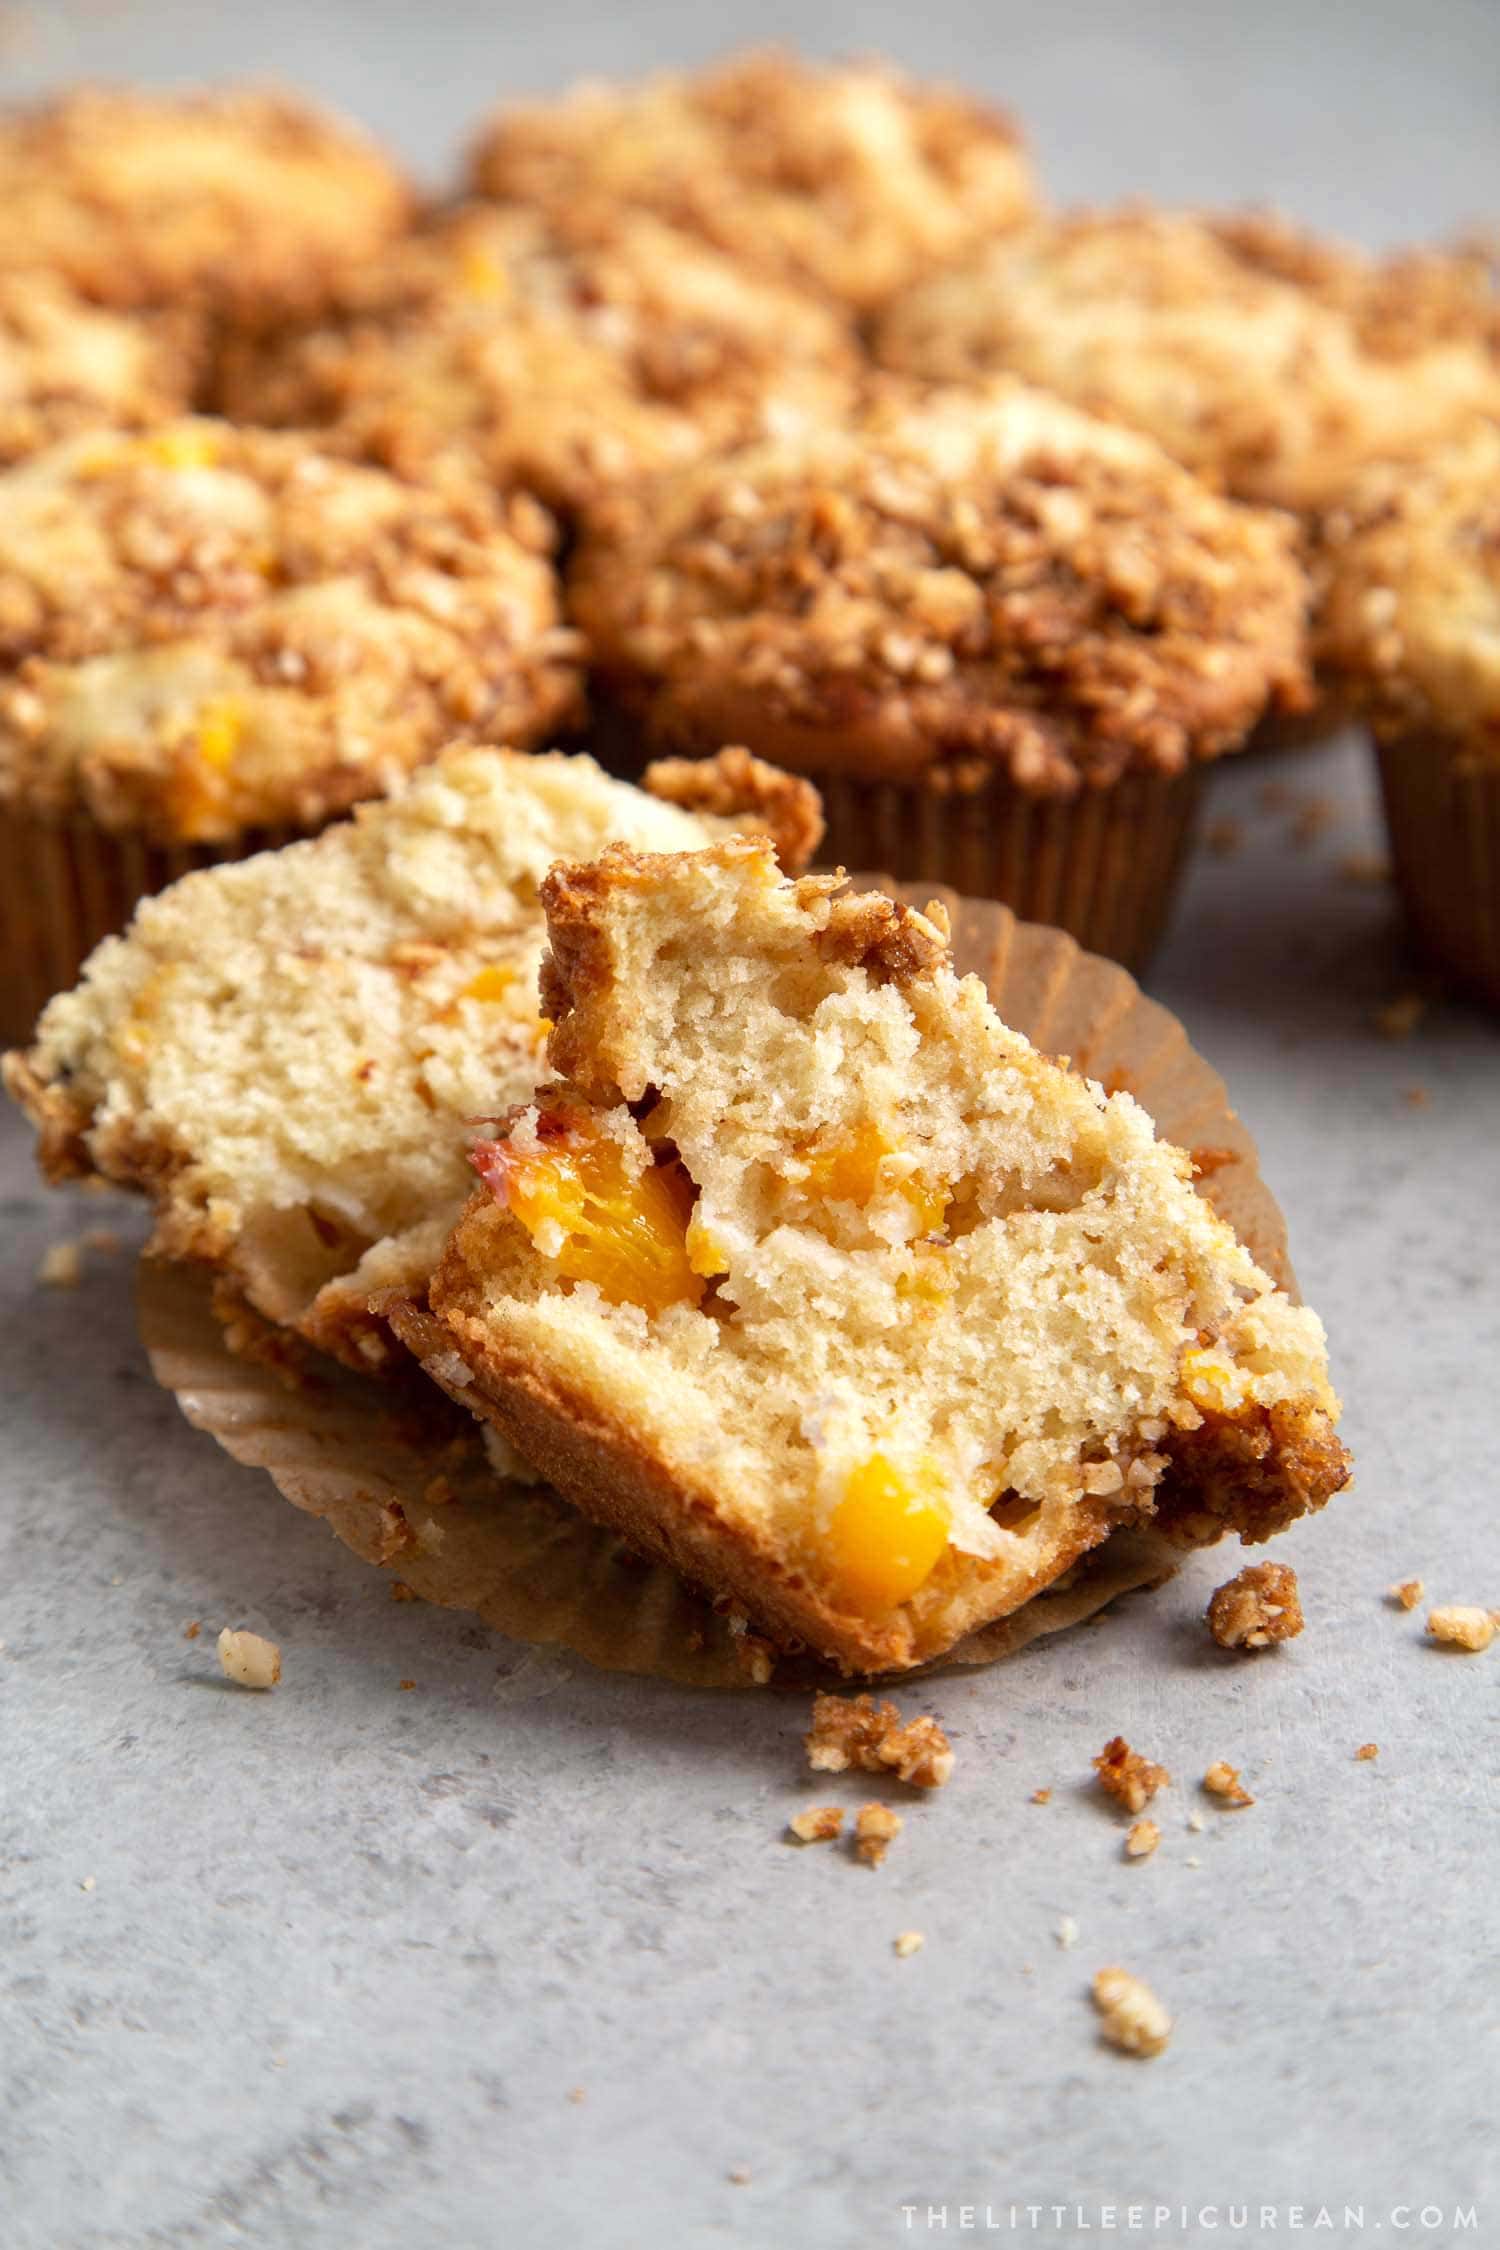 Almond Streusel Peach Muffins. Vanilla muffins mixed with fresh peaches and topped with almond streusel crumble.